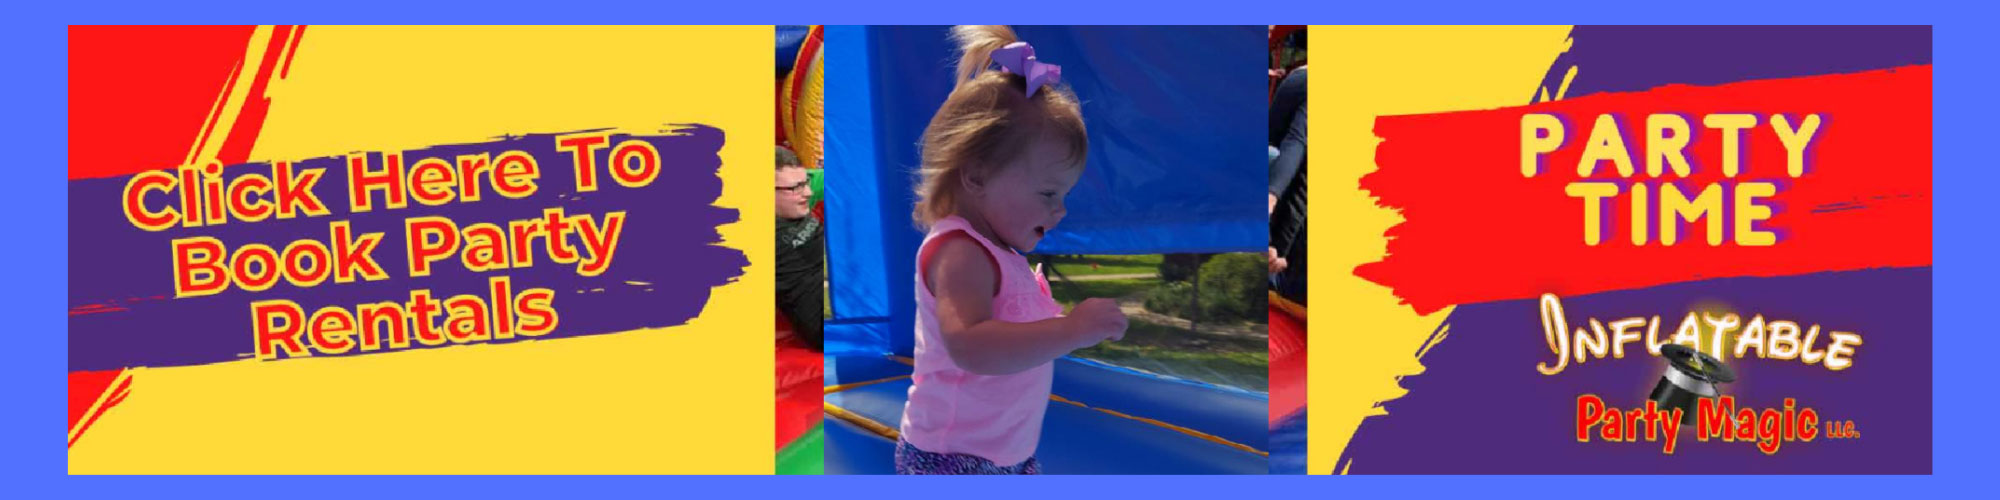 Bounce House Rentals near me 